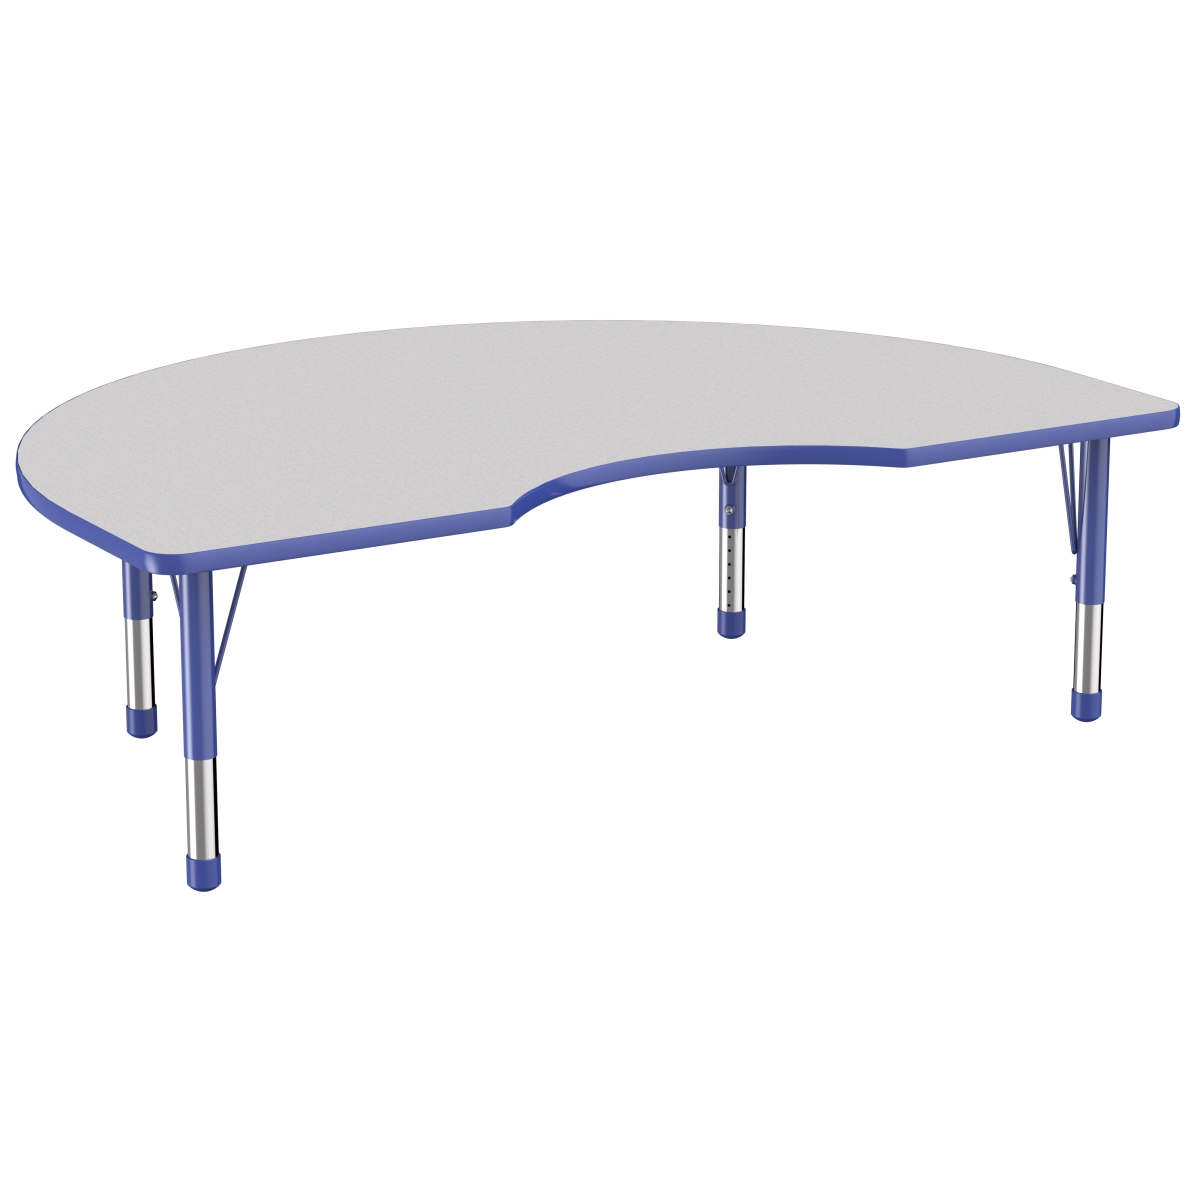 10087-gybl 48 X 72 In. Kidney T-mold Adjustable Activity Table With Chunky Leg - Grey & Blue